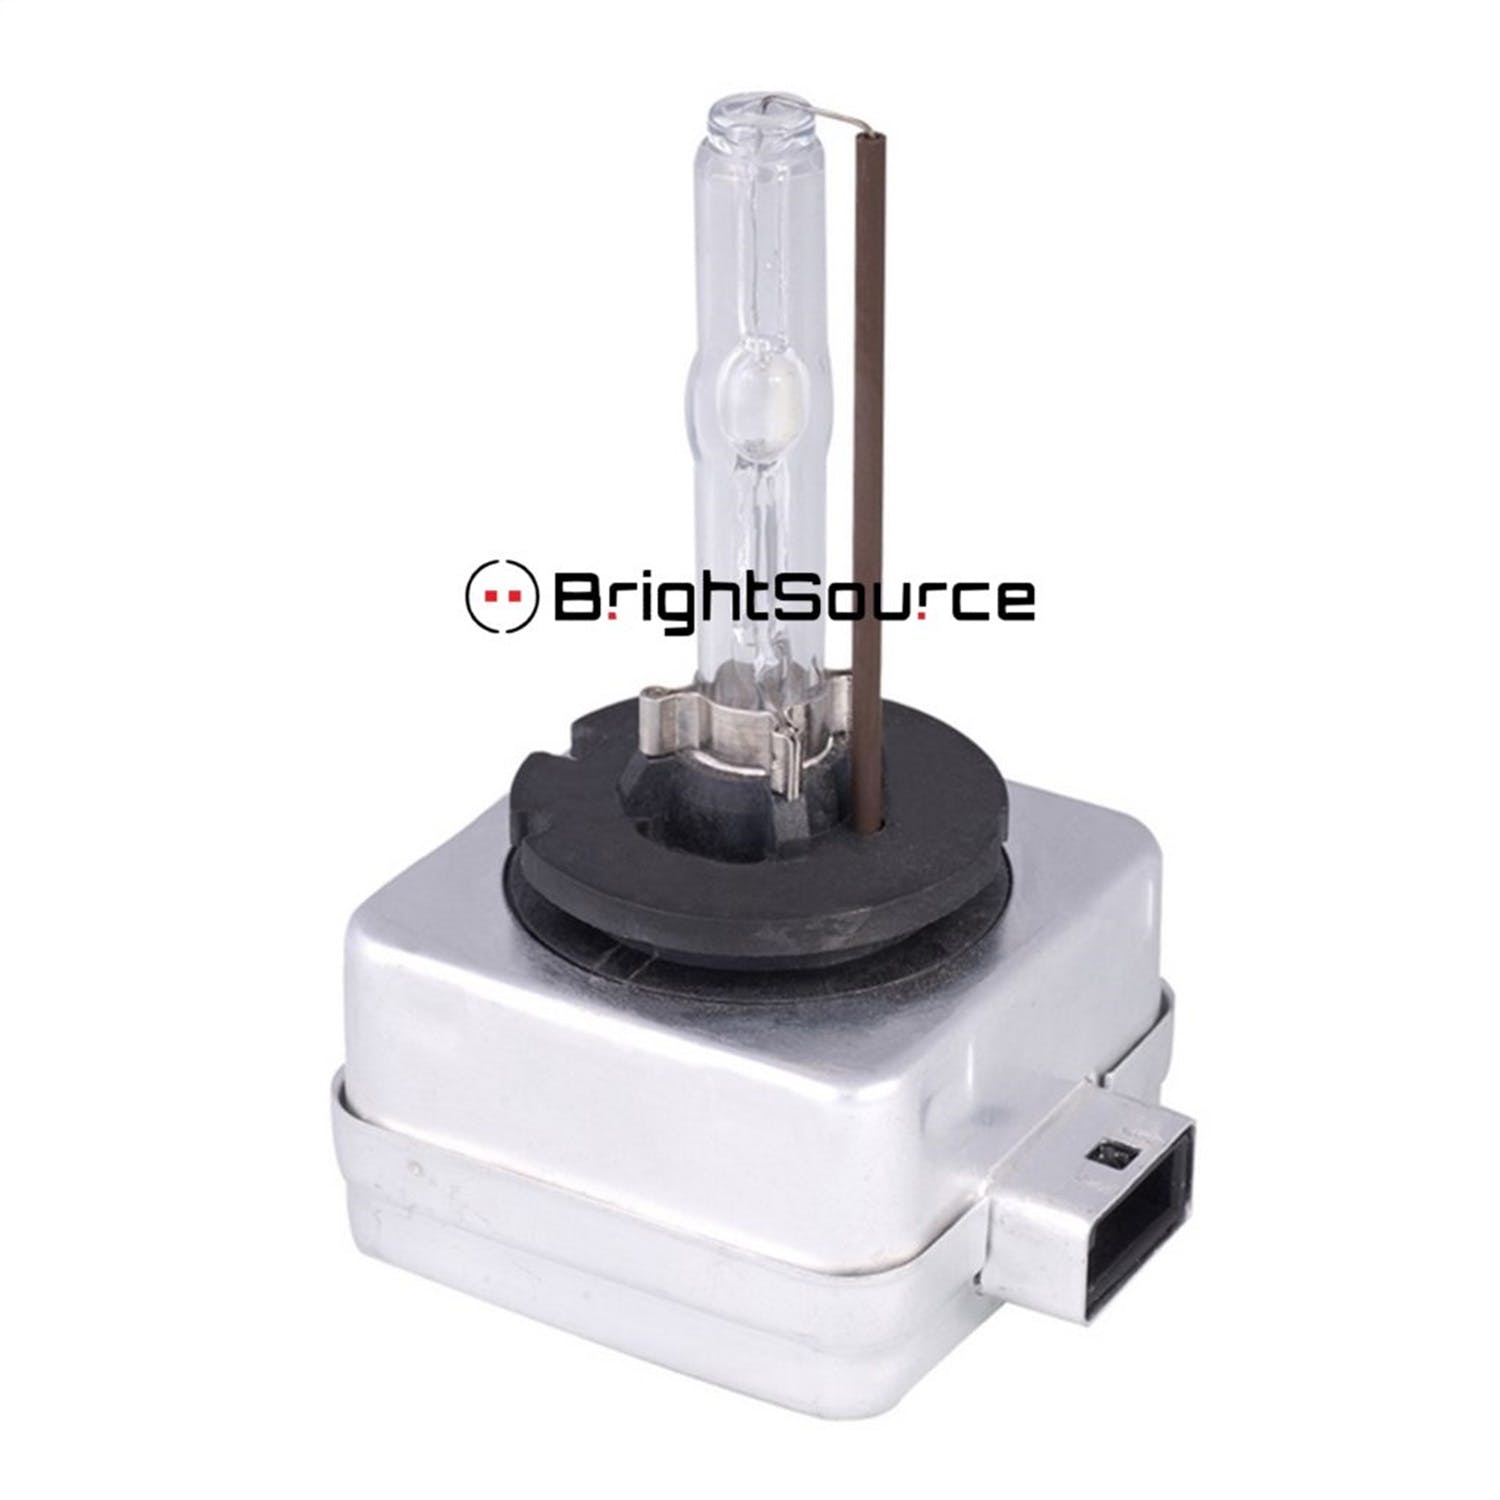 BrightSource D3S60 Single D3 OE Replacement/Upgrade Bulb 6000K